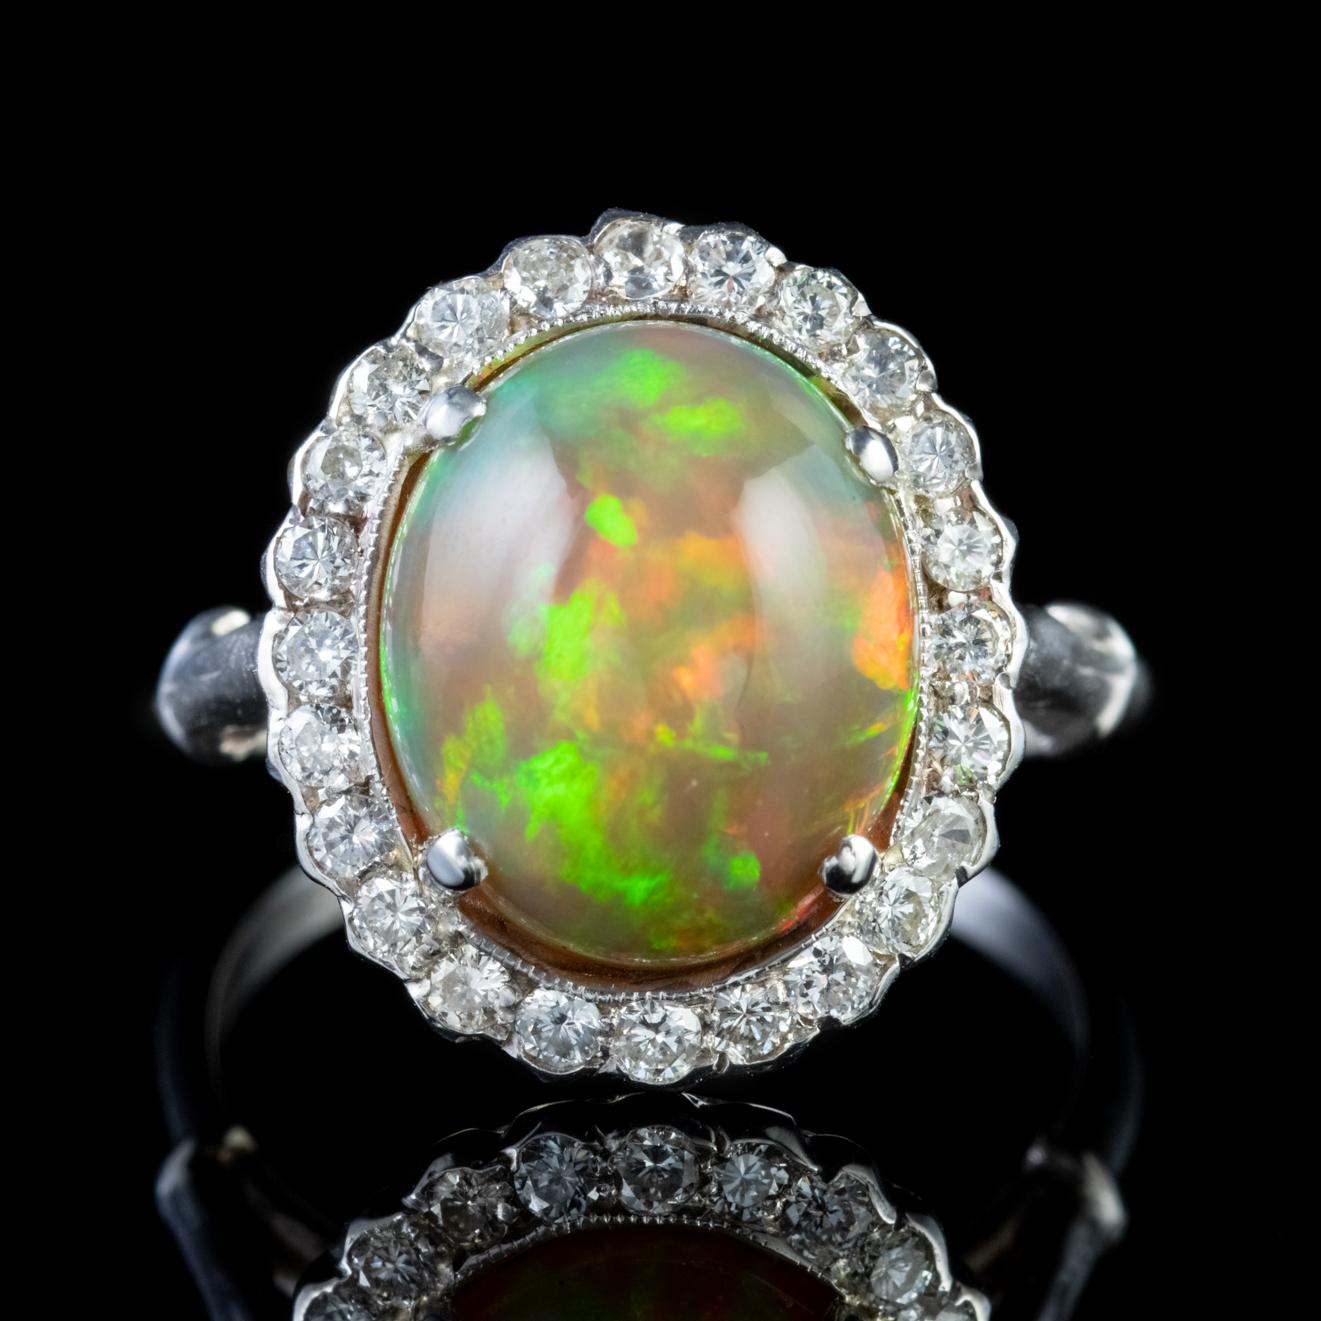 A glorious antique Edwardian cluster ring adorned with a magnificent 6ct natural Opal haloed by a sparkling frame of approx. 1.20ct of old cut Diamonds which complement the central stone beautifully. 

The lovely Opal is a kaleidoscope of rainbow